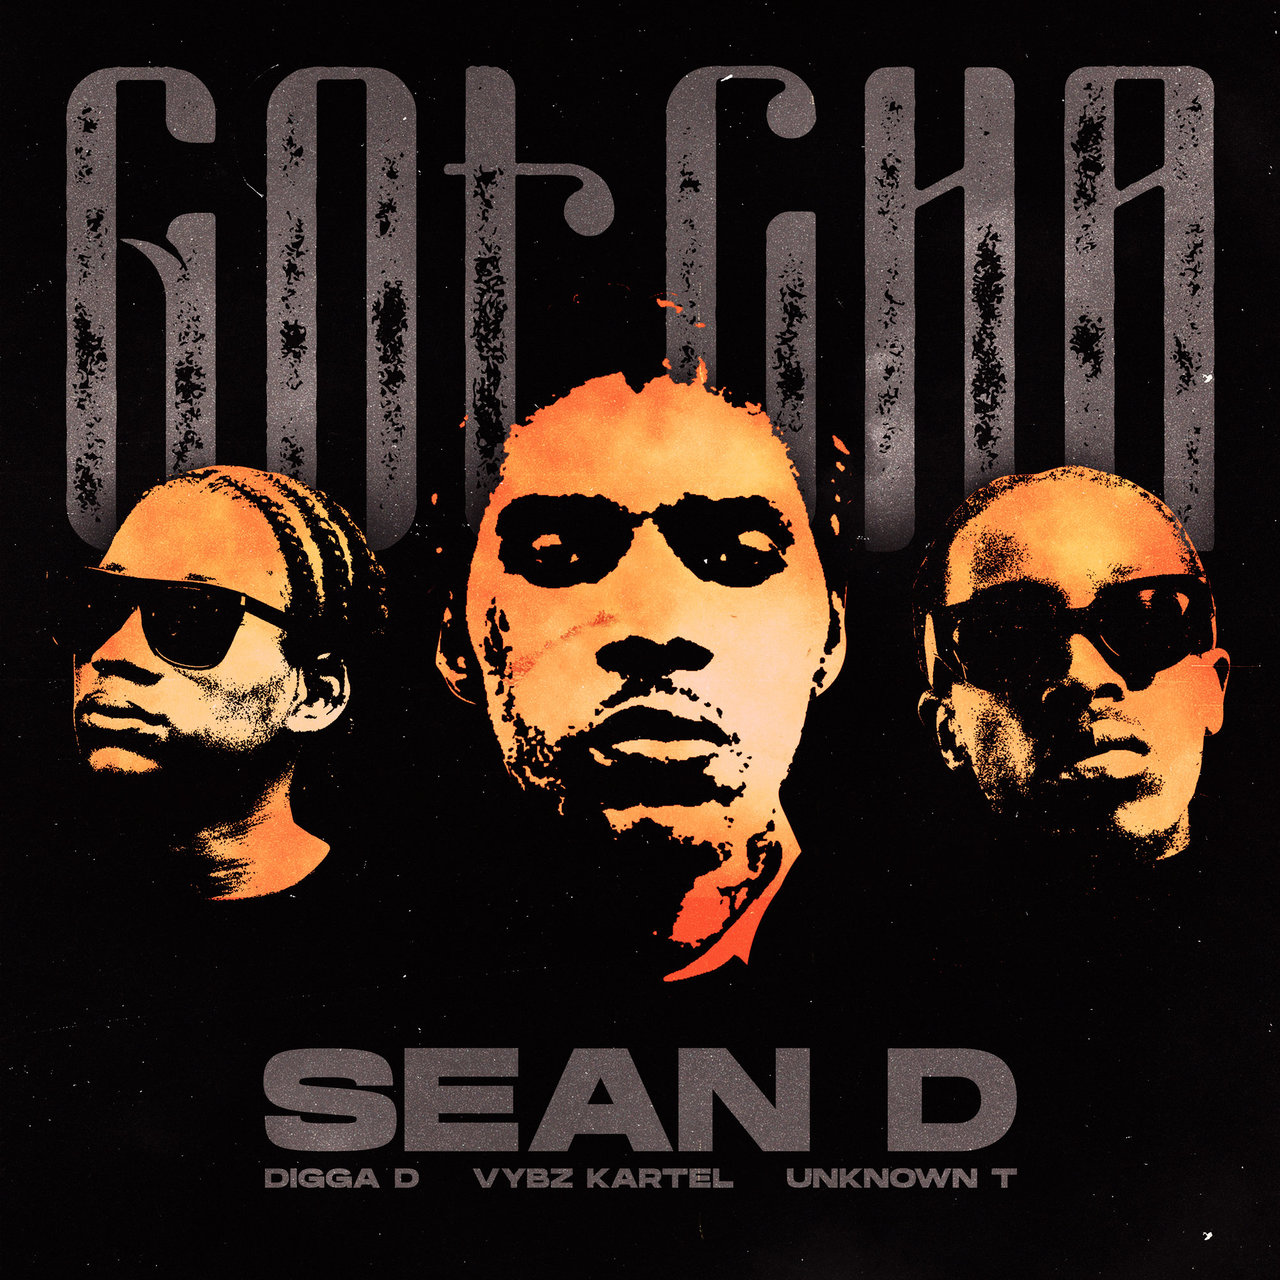 Sean D - Gotcha (ft. Vybz Kartel, Digga D and Unknown T) (Cover)